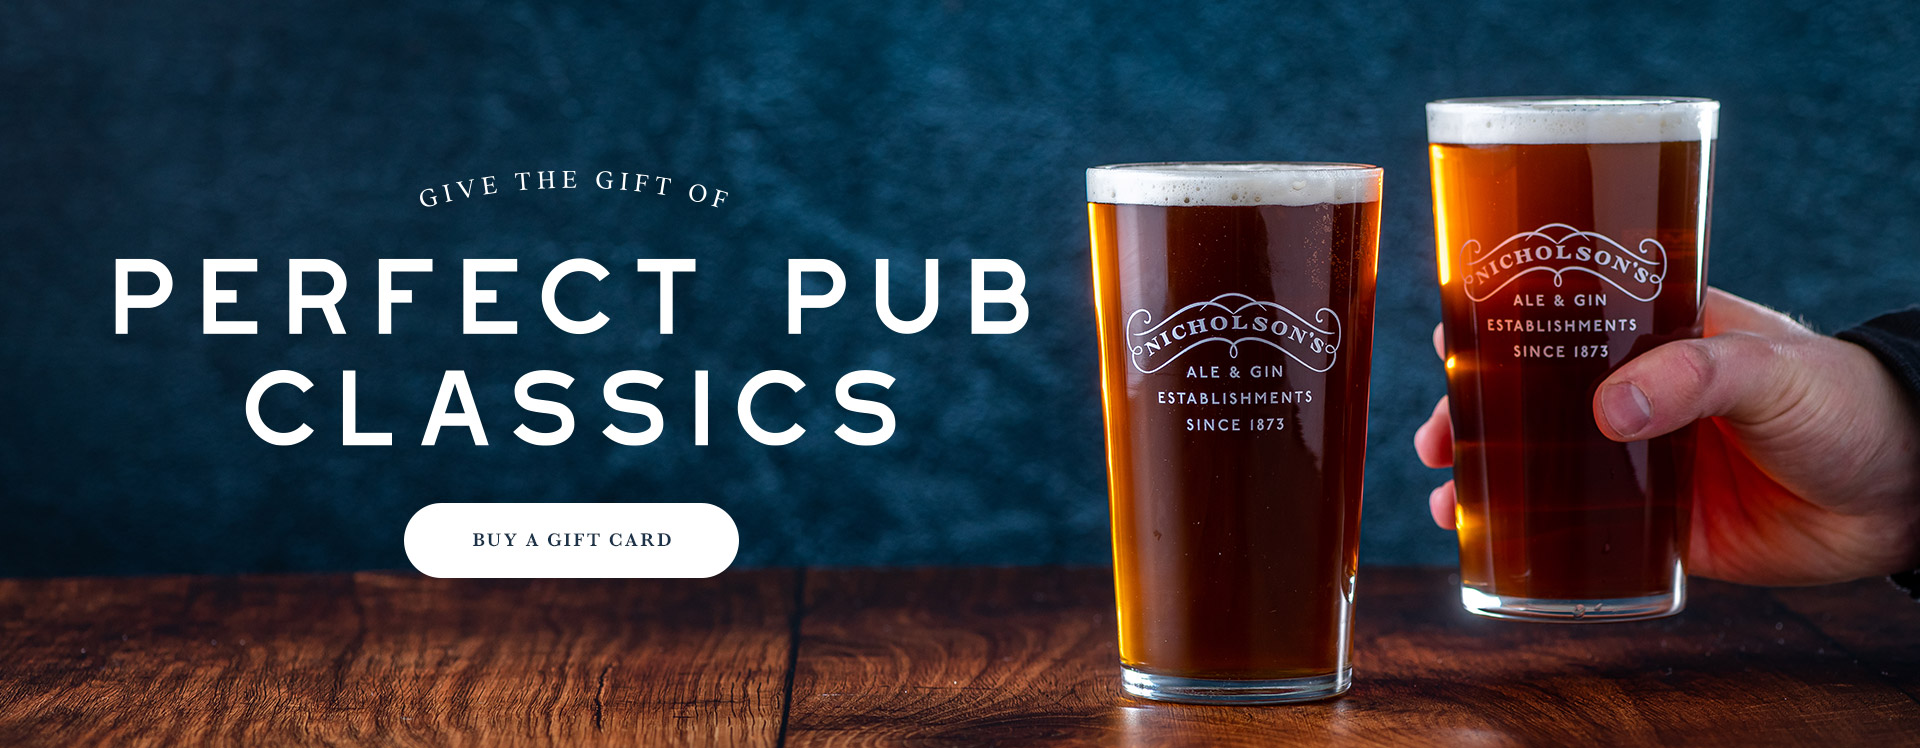 Nicholson’s Pub Gift Voucher at The St George's Tavern in London